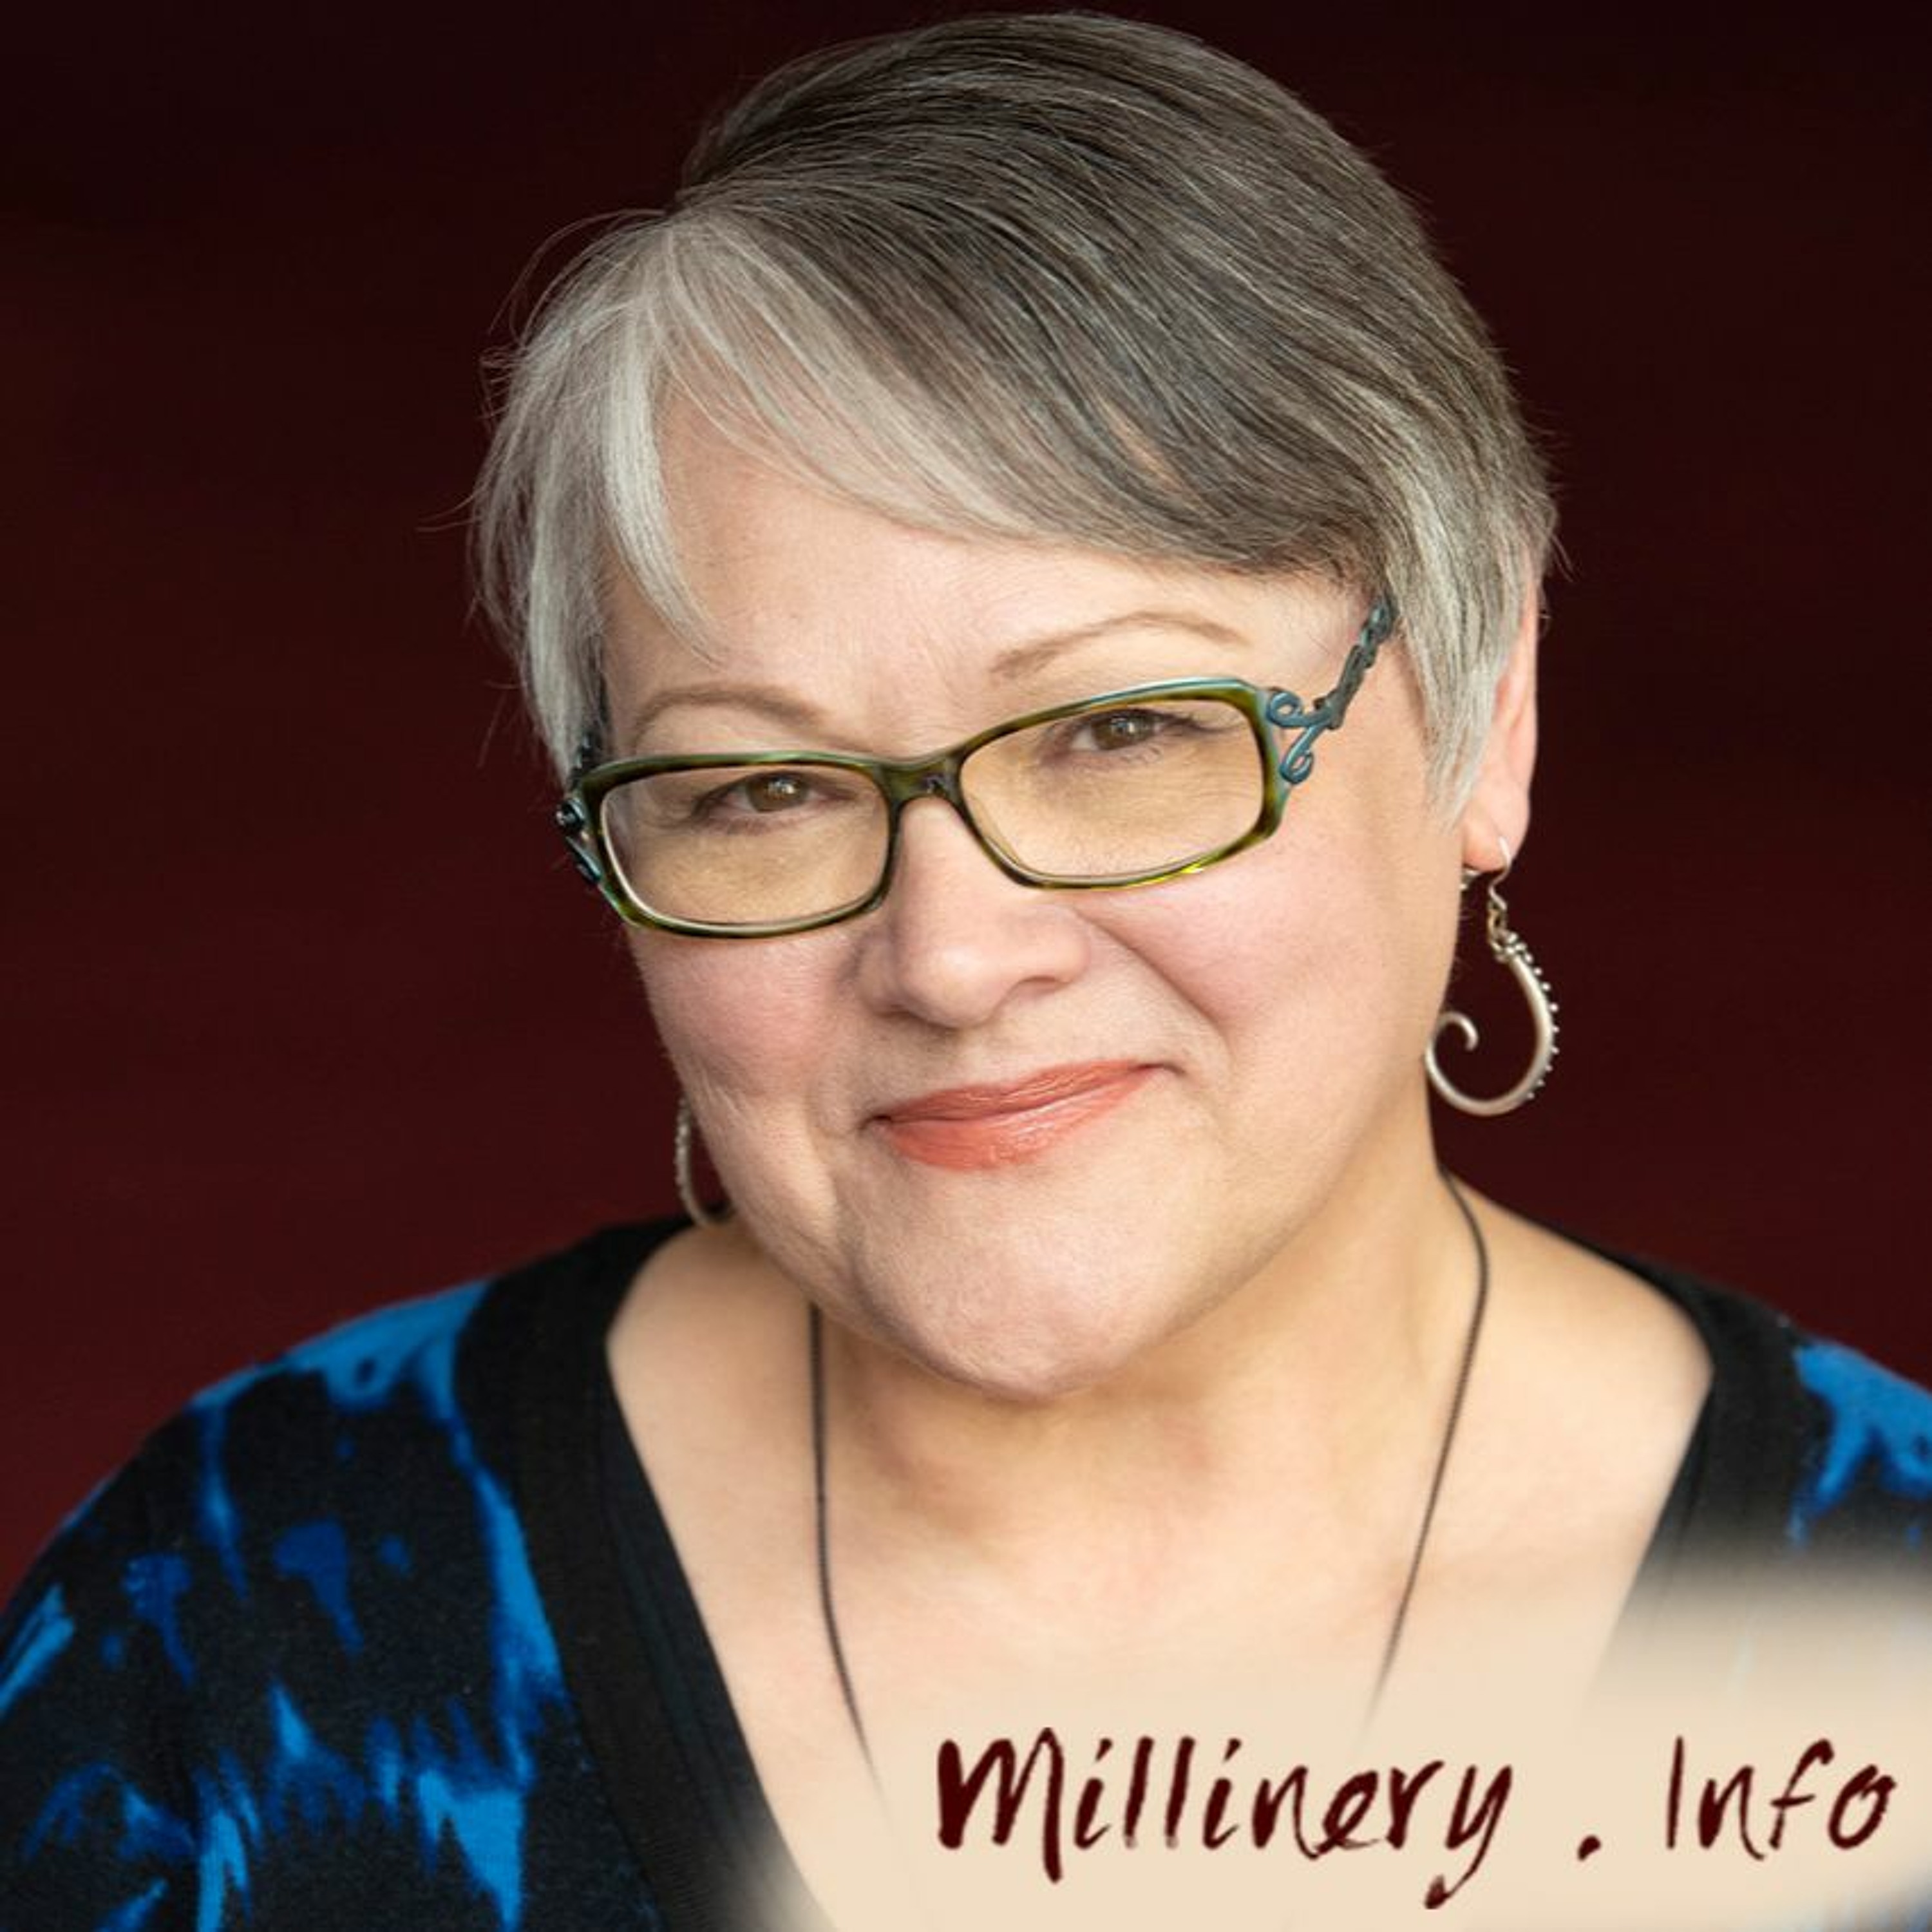 Janet Linville Millinery.Info Podcast